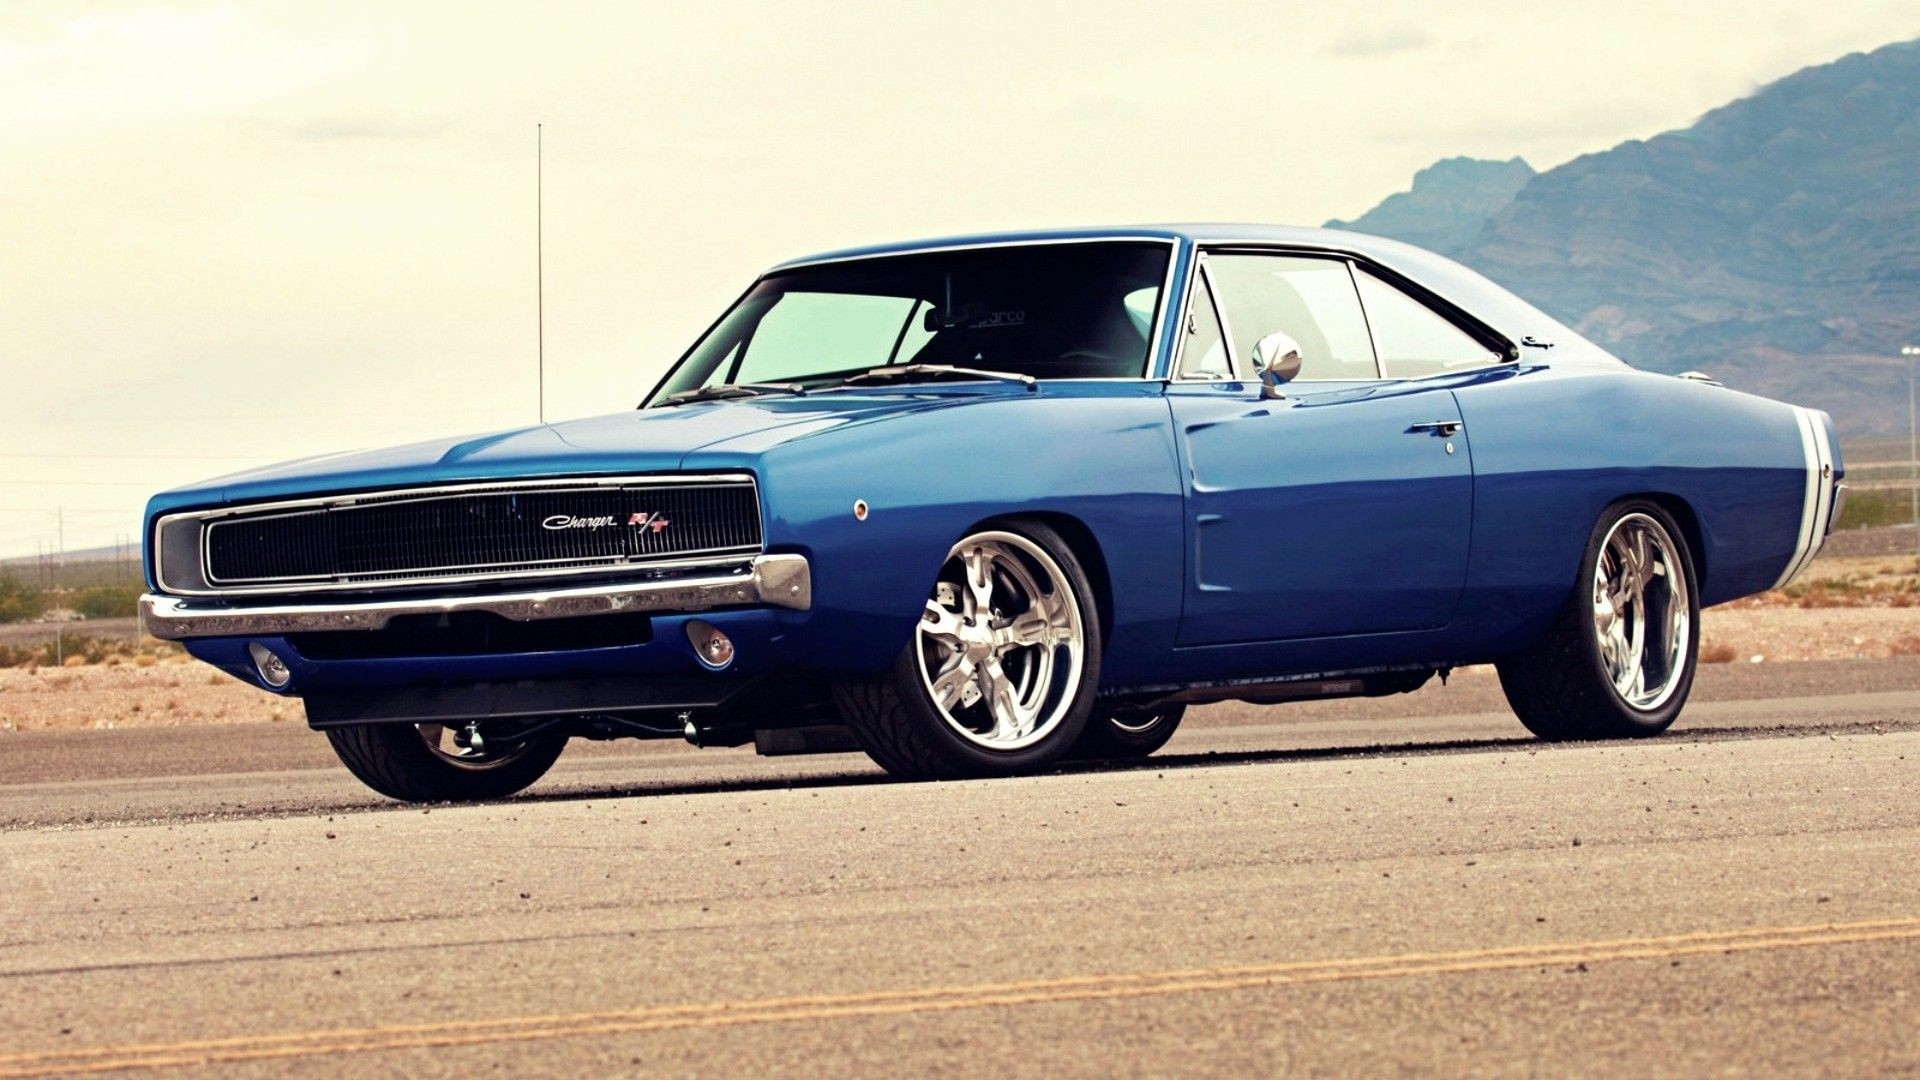 Dodge Charger Wallpaper Full HD